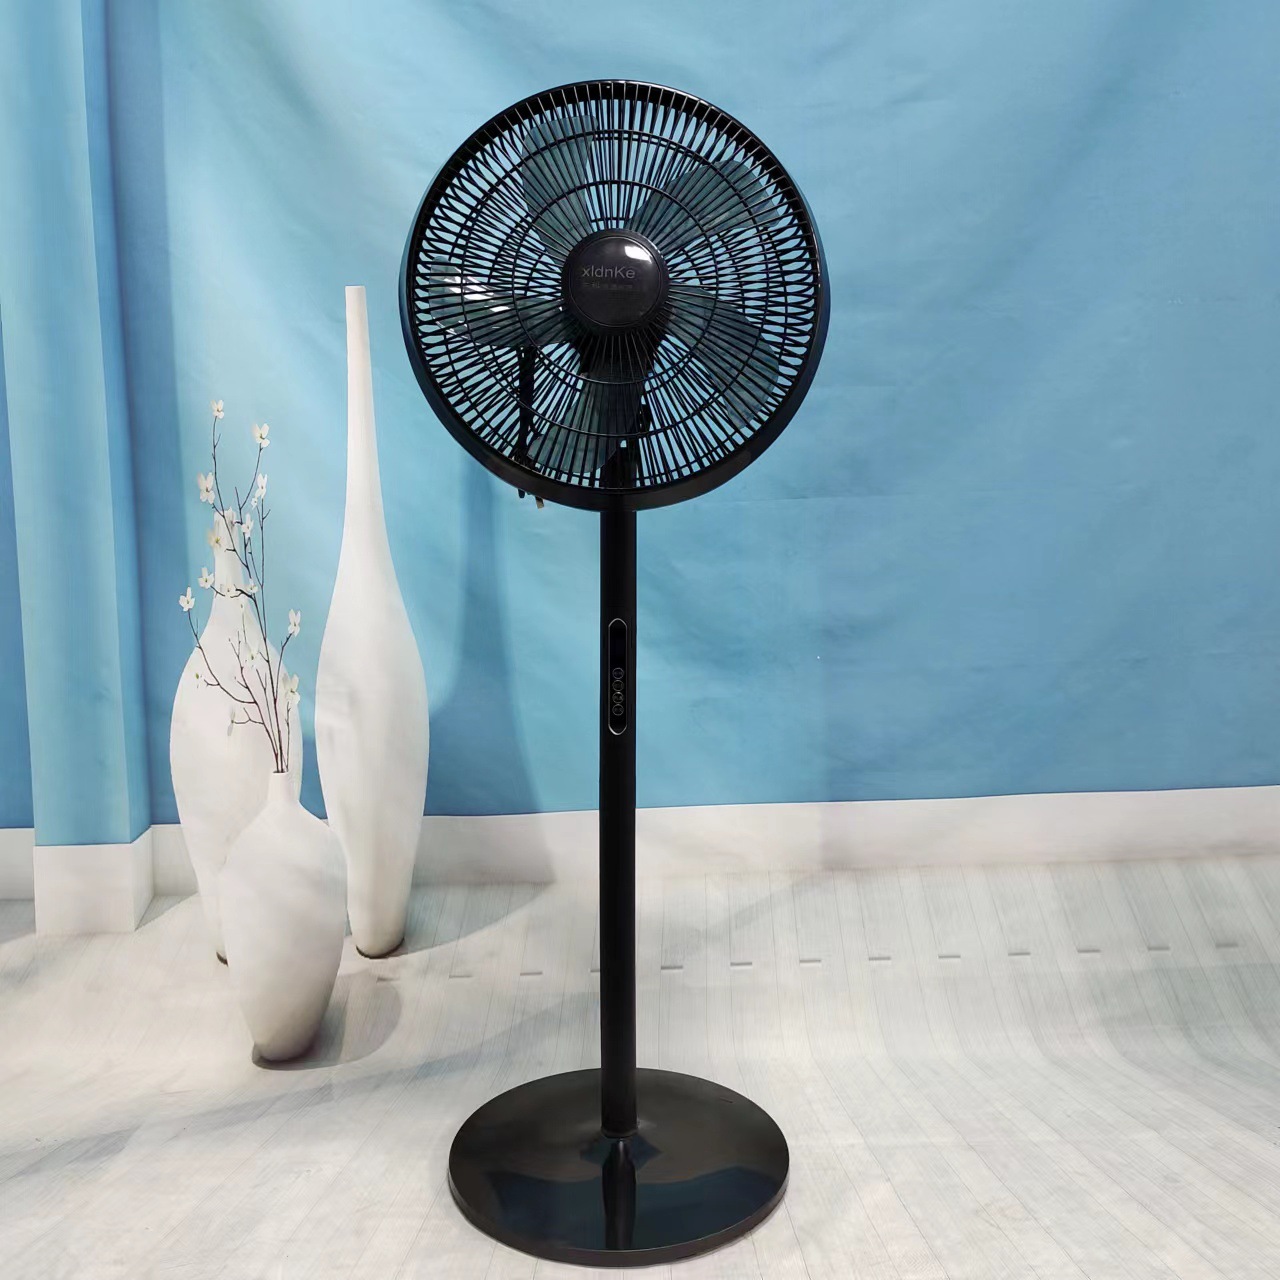 Factory Direct Supply Electric Fan Wholesale Remote Control Vertical Electric Fan Household Timing Floor Fan Shaking Head with Screen Display Electric Fan